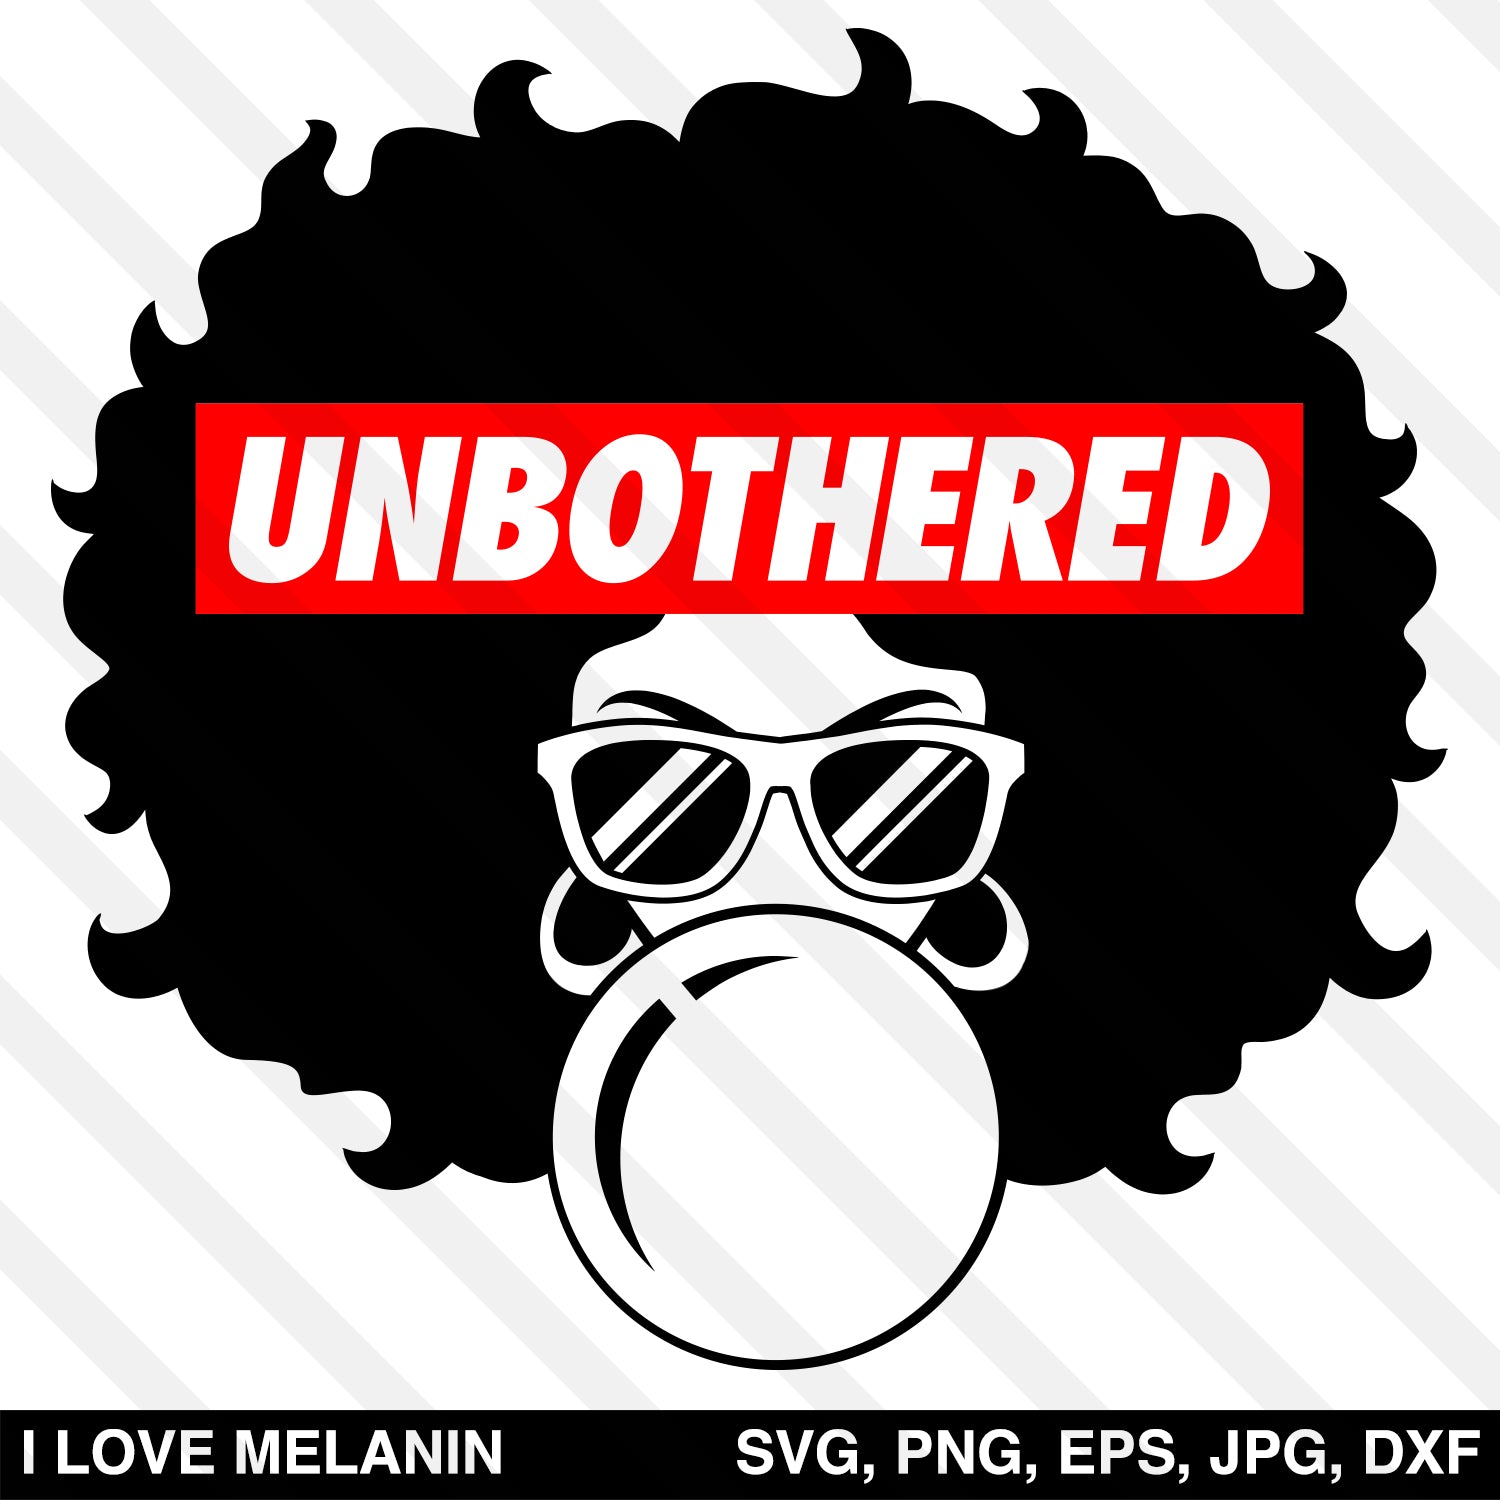 Download Unbothered Black Queen Afro Woman SVG - I Love Melanin